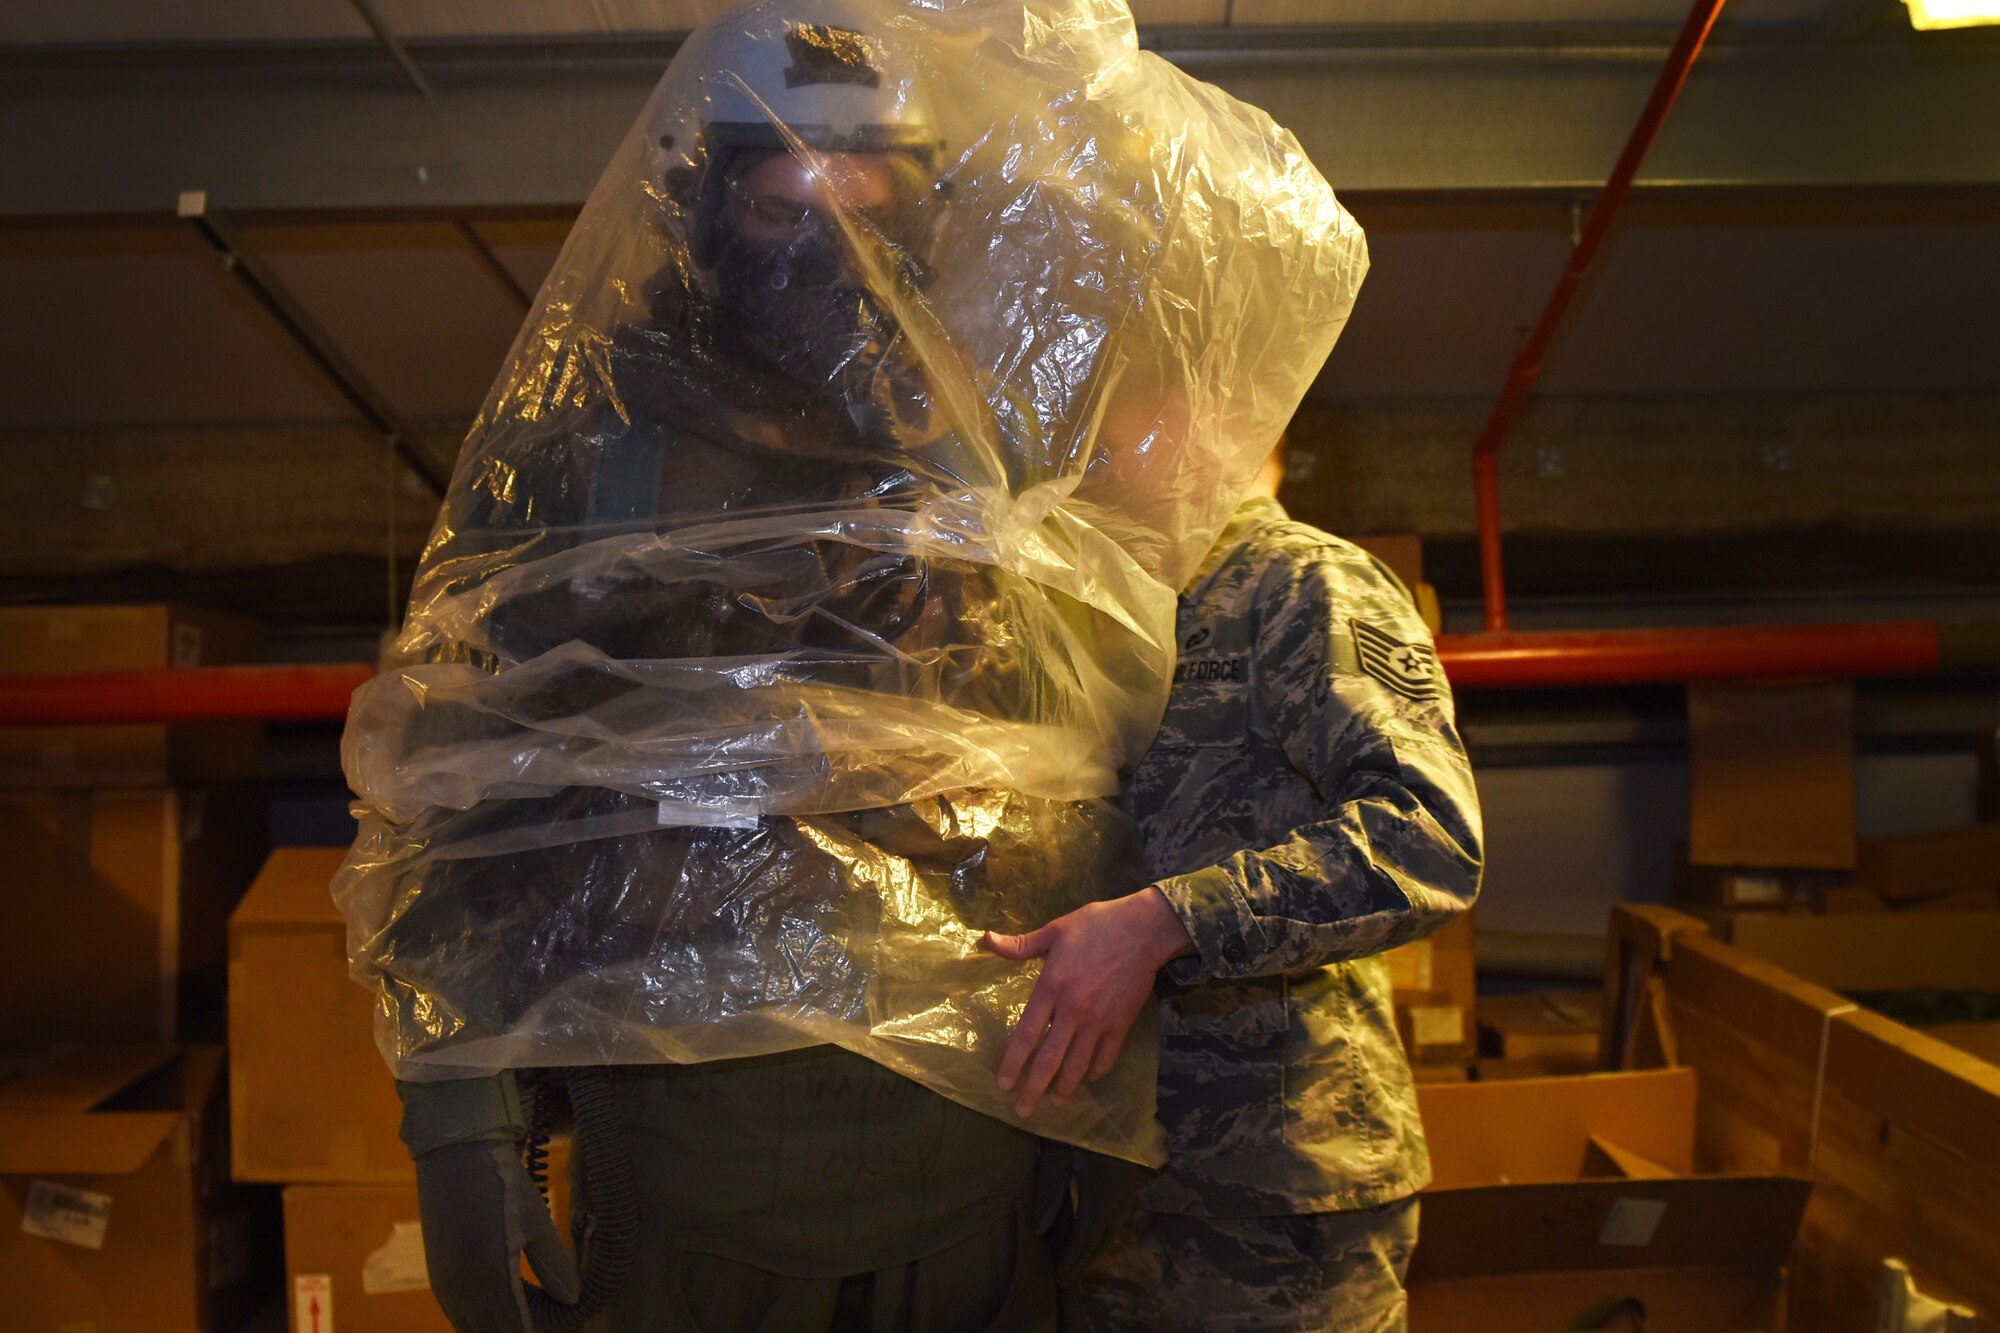 Tech. Sgt. David Vazquez Velez, 48th Fighter Wing Aircrew Flight Equipment, demonstrates the use of an over cape during an Aircrew Contamination Control Area training exercise at Royal Air Force Lakenheath, England, Feb. 21, 2020. The training is conducted to ensure pilots and weapons systems officers can maintain mission readiness under any adverse conditions.  (U.S. Air Force photo by Airman 1st Class Jessi Monte)